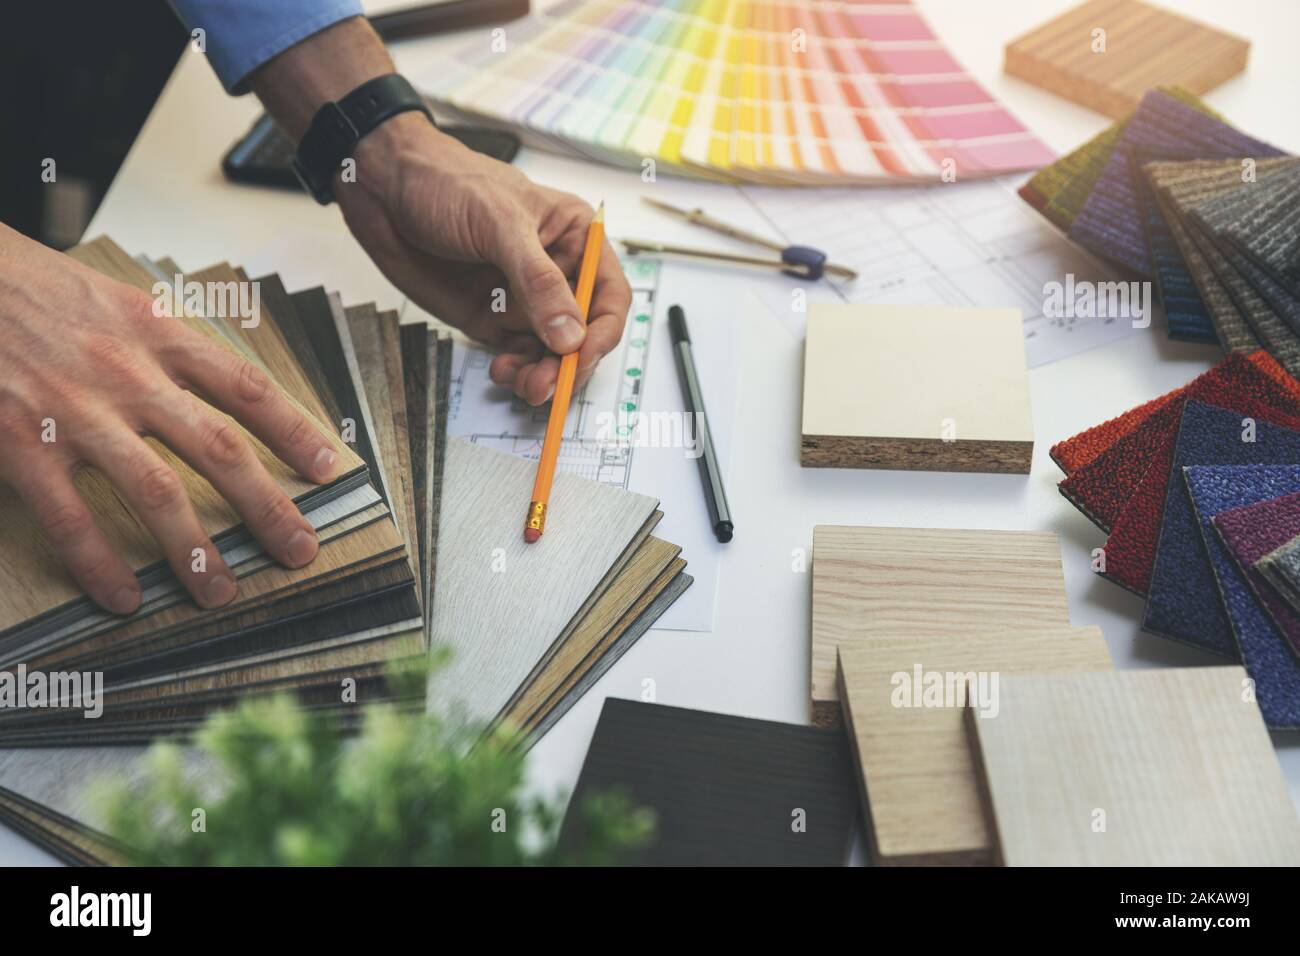 designer choosing flooring and furniture materials from samples for home interior design project Stock Photo